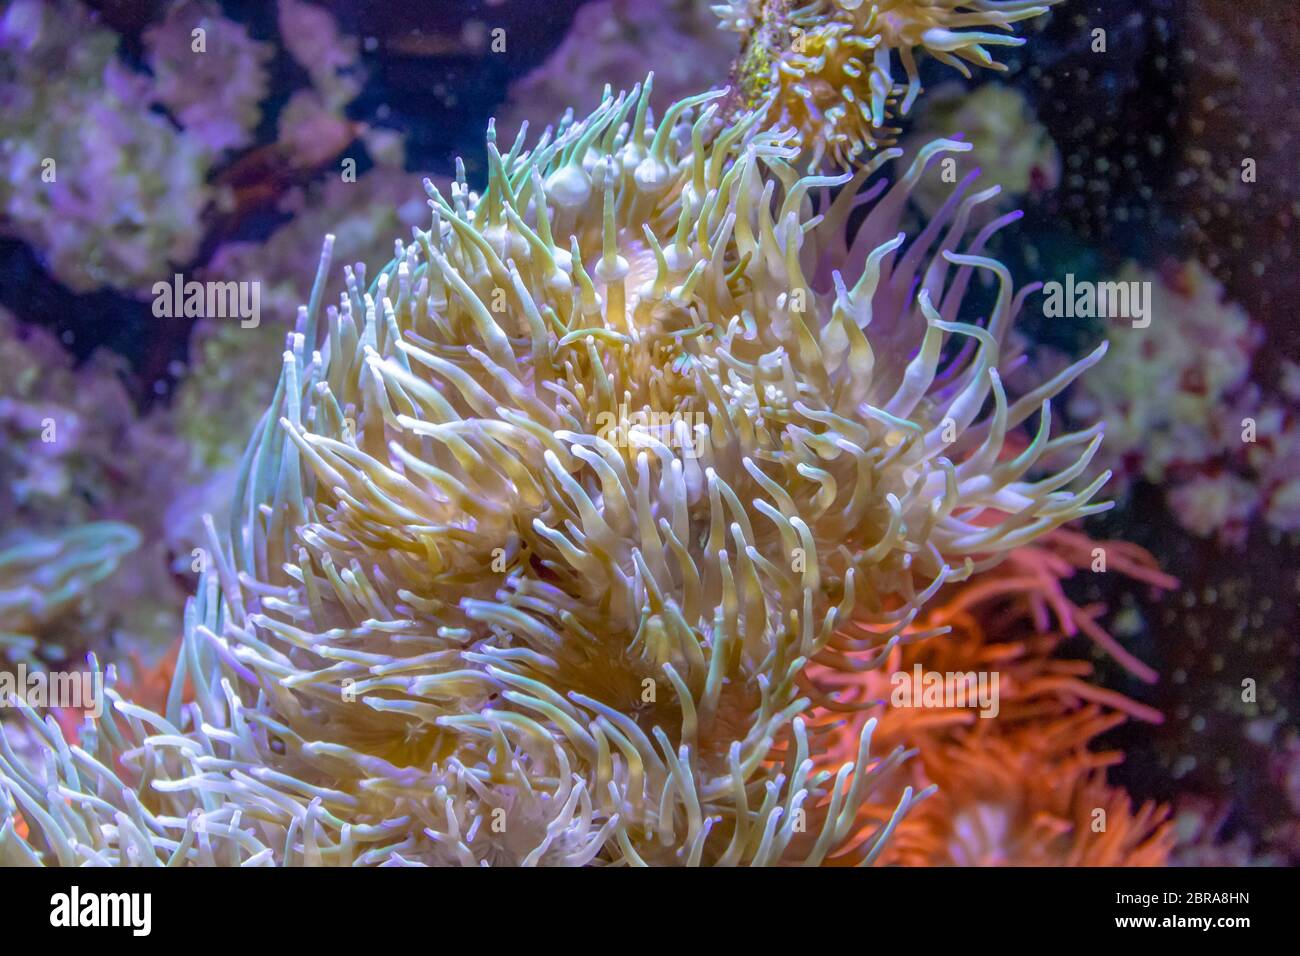 Sea anemones in natural underwater ambiance Stock Photo